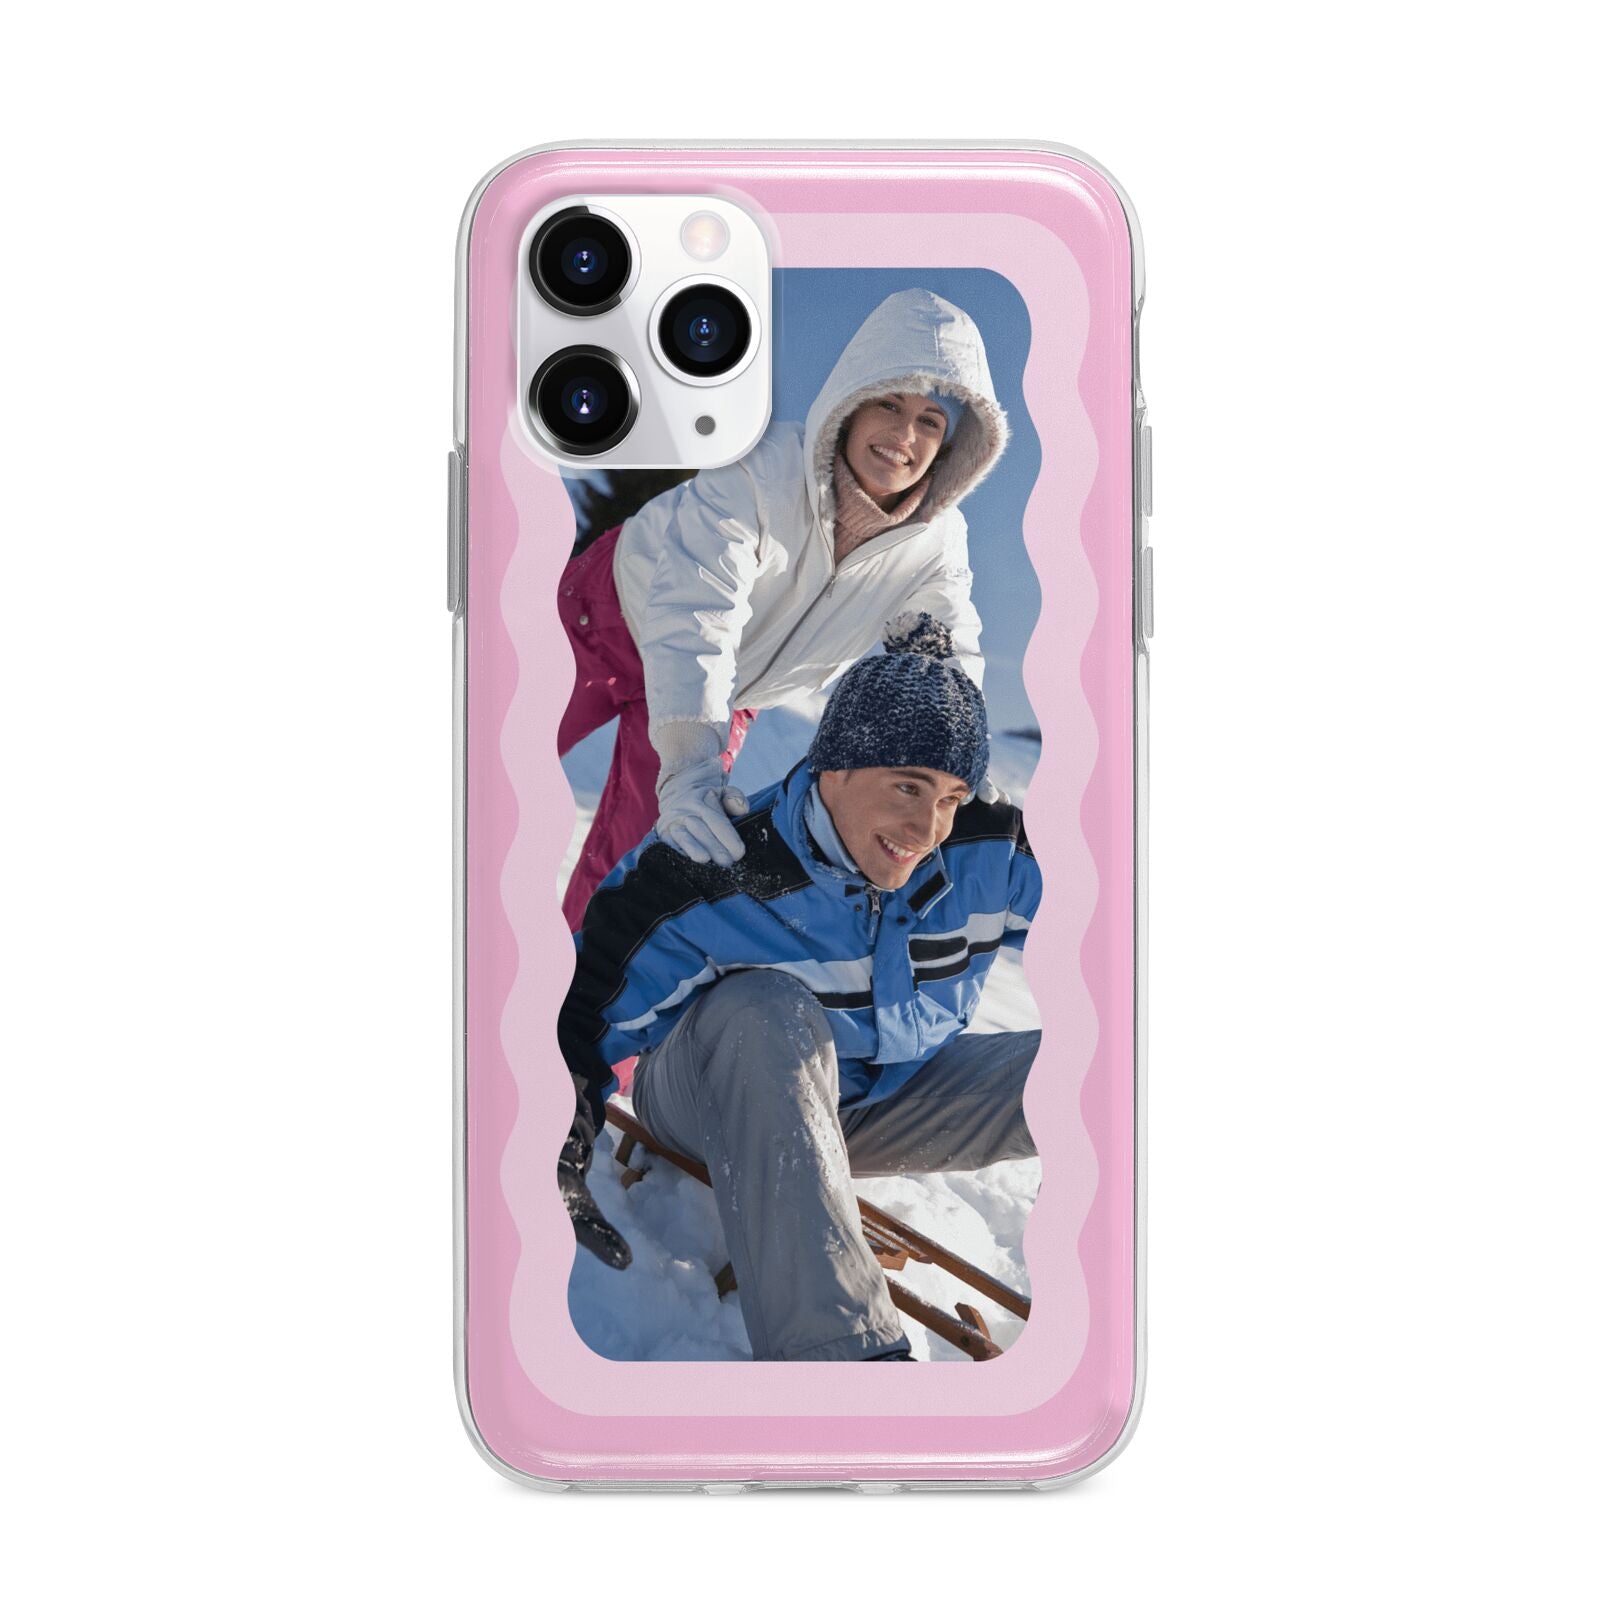 Wavy Photo Border Apple iPhone 11 Pro in Silver with Bumper Case